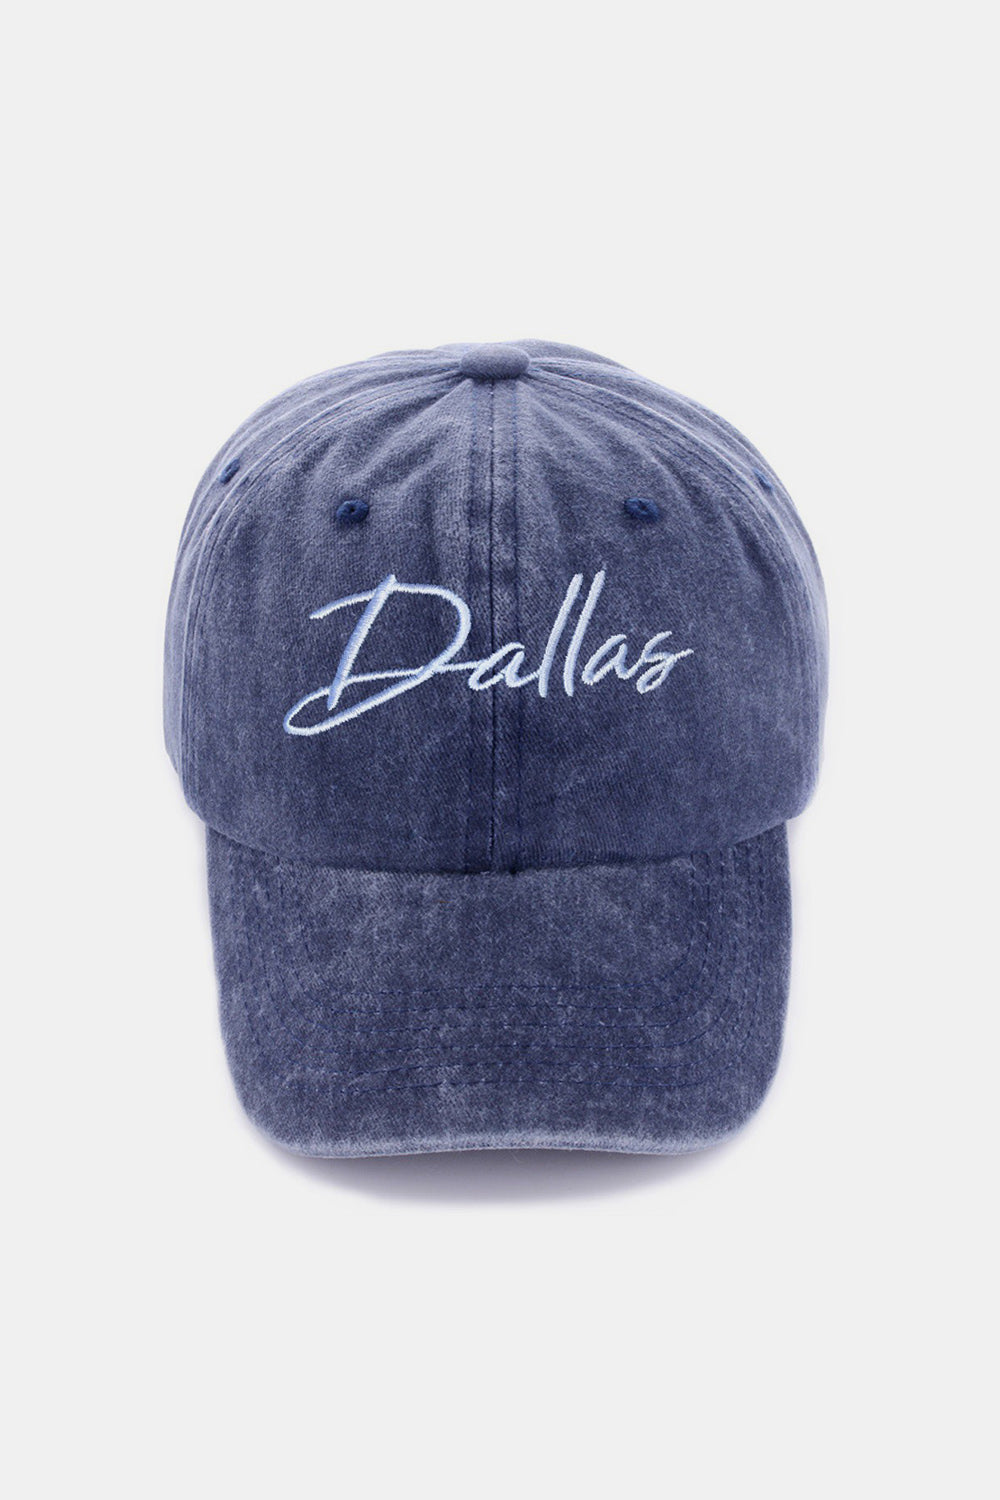 Washed Baseball Cap DALLAS Embroidered